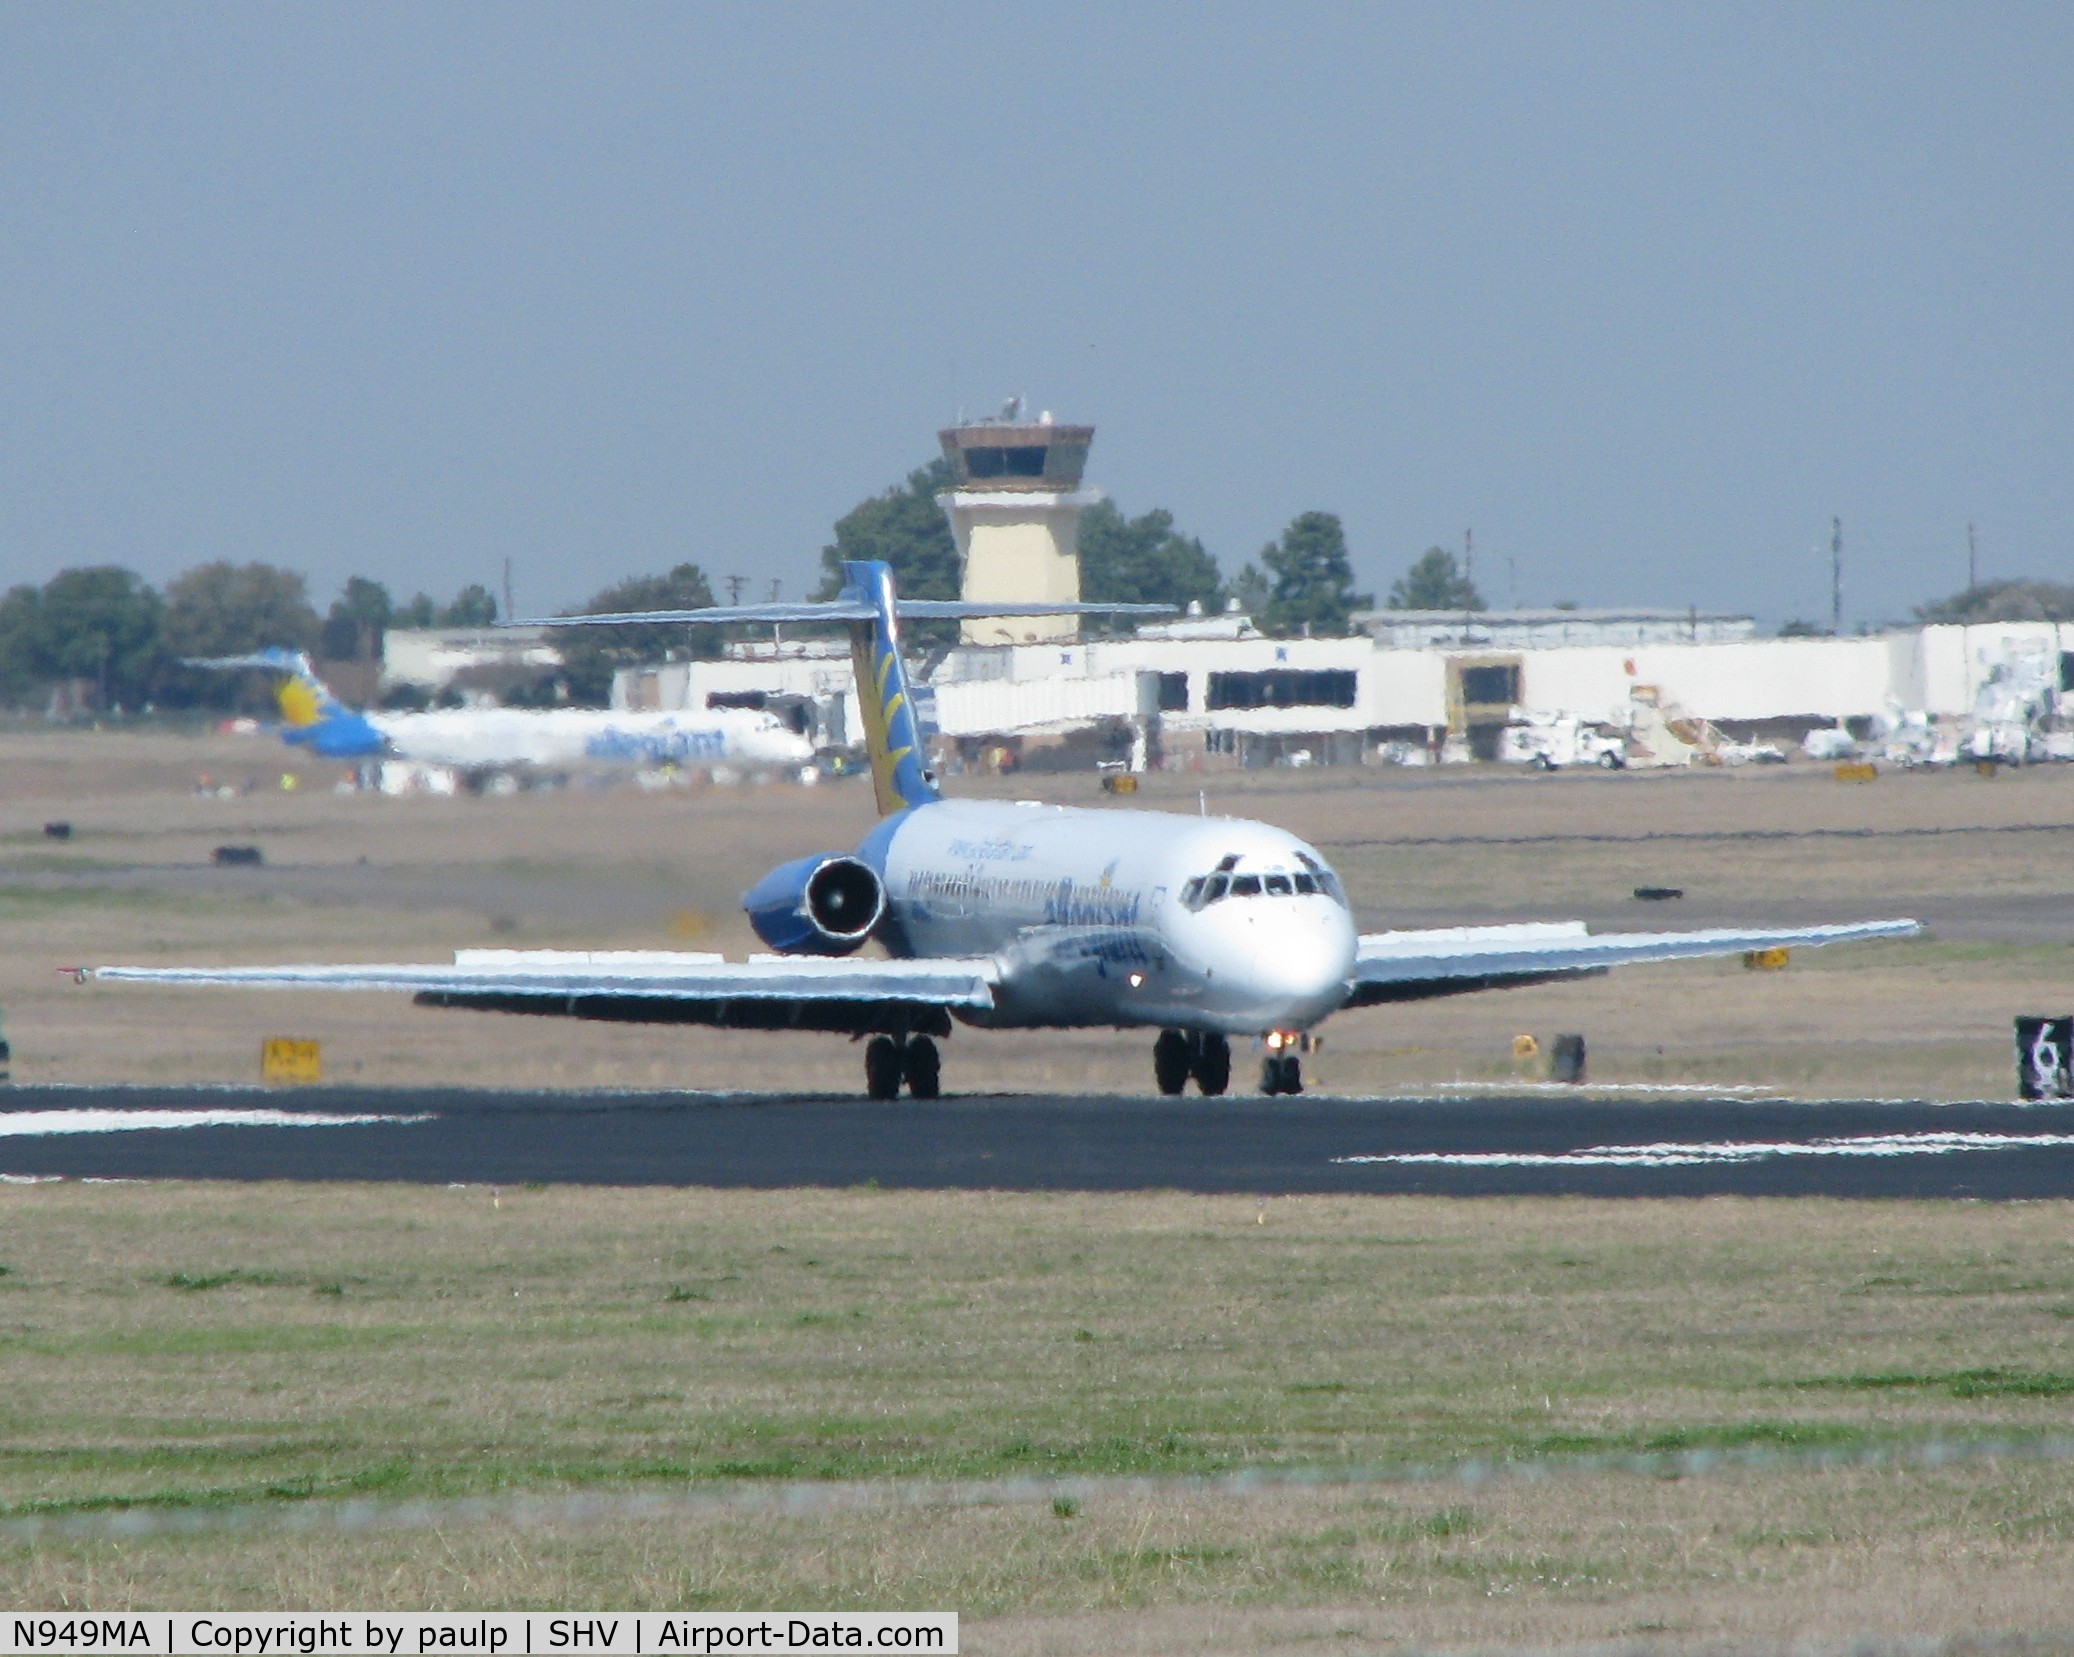 N949MA, 1989 McDonnell Douglas MD-87 (DC-9-87) C/N 49779, Just landed on 14 at the Shreveport Regional airport.